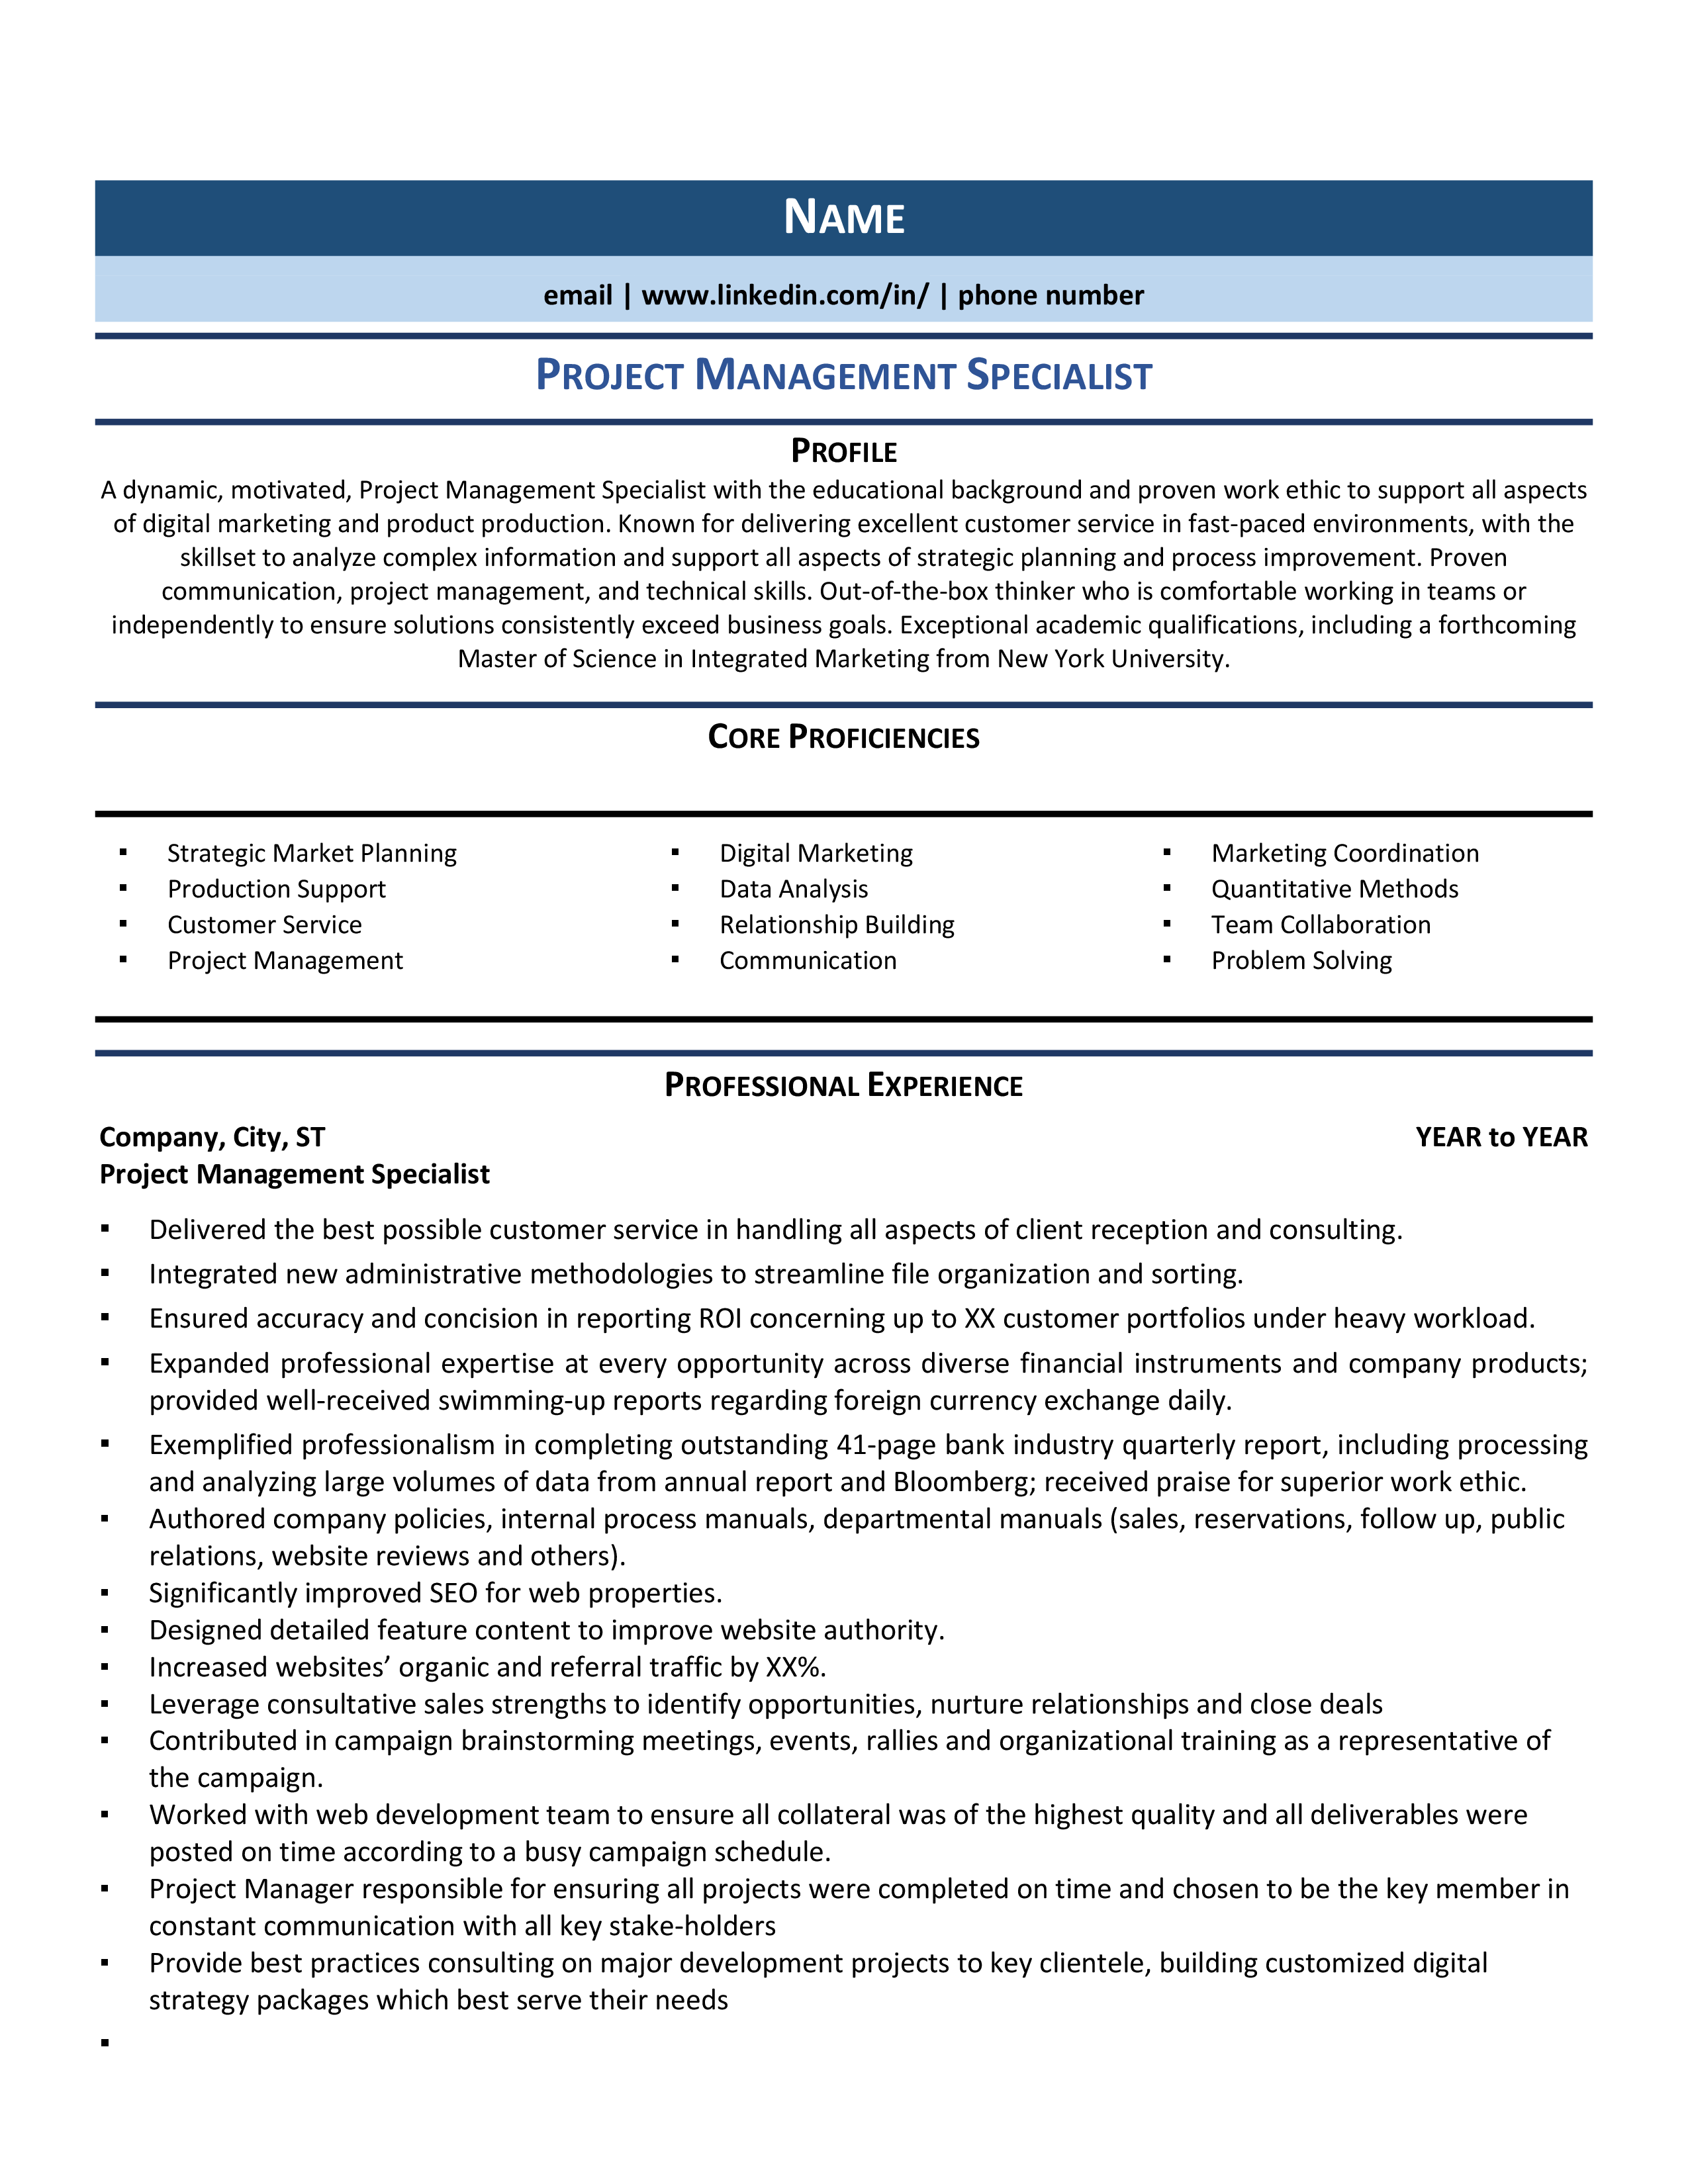 sample resume project manager areas of expertise